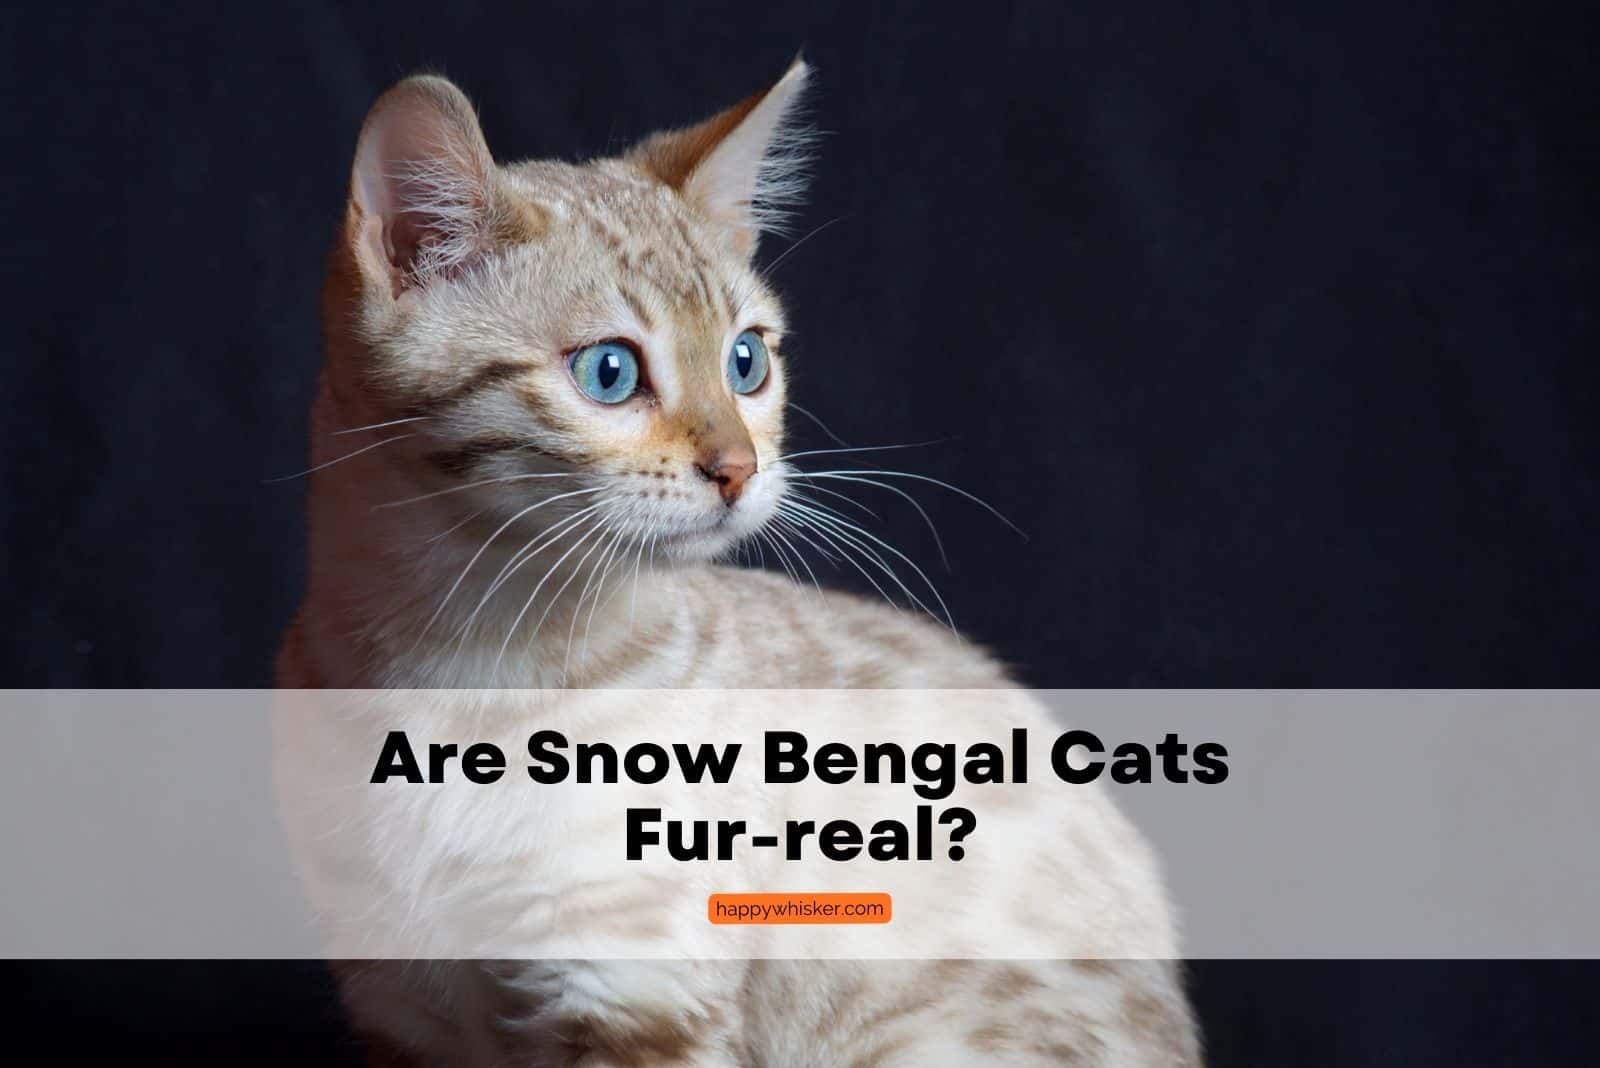 Are Snow Bengal Cats Fur-real?